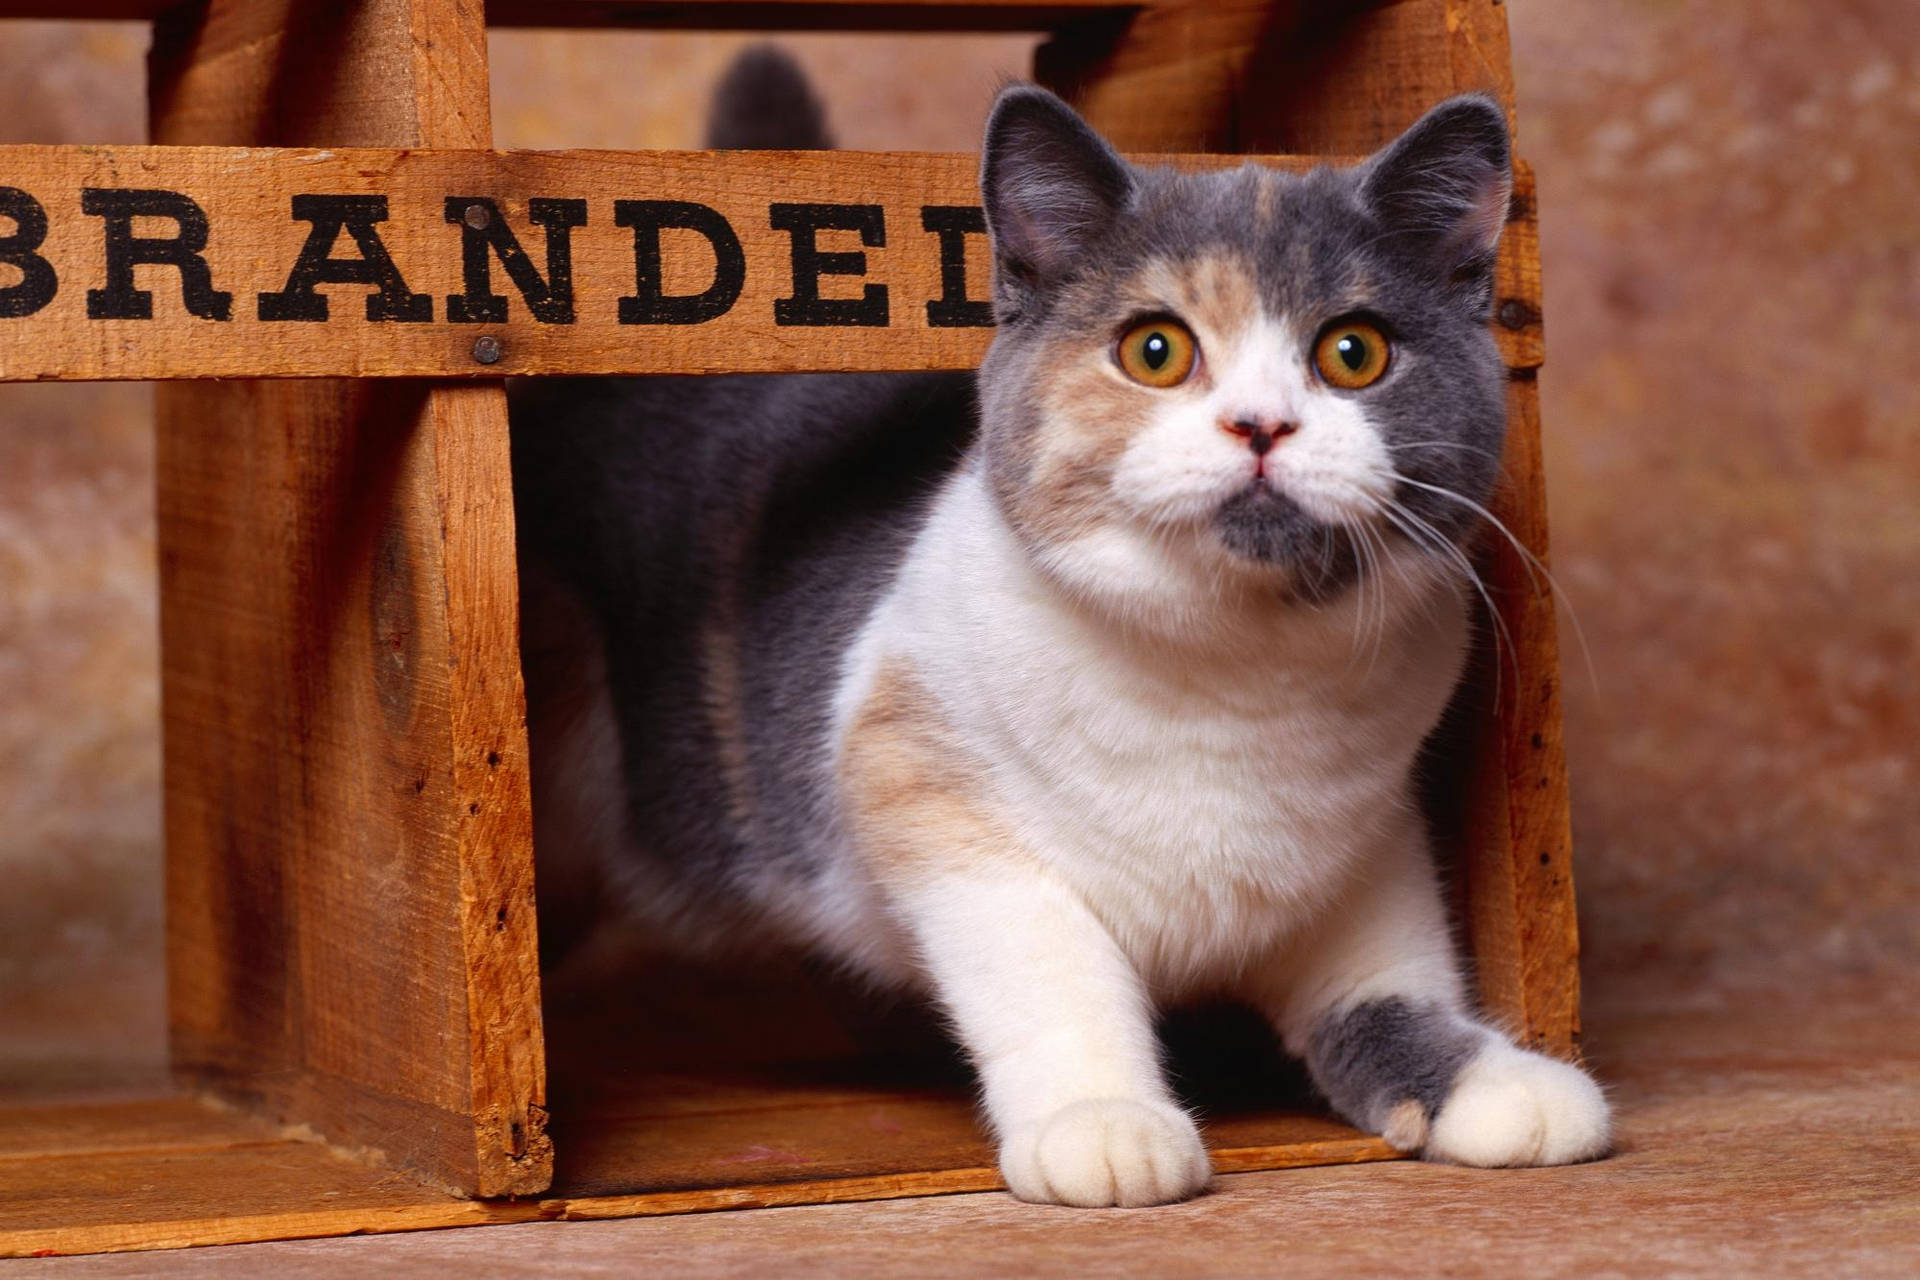 A Cat Is Standing In A Wooden Crate Background